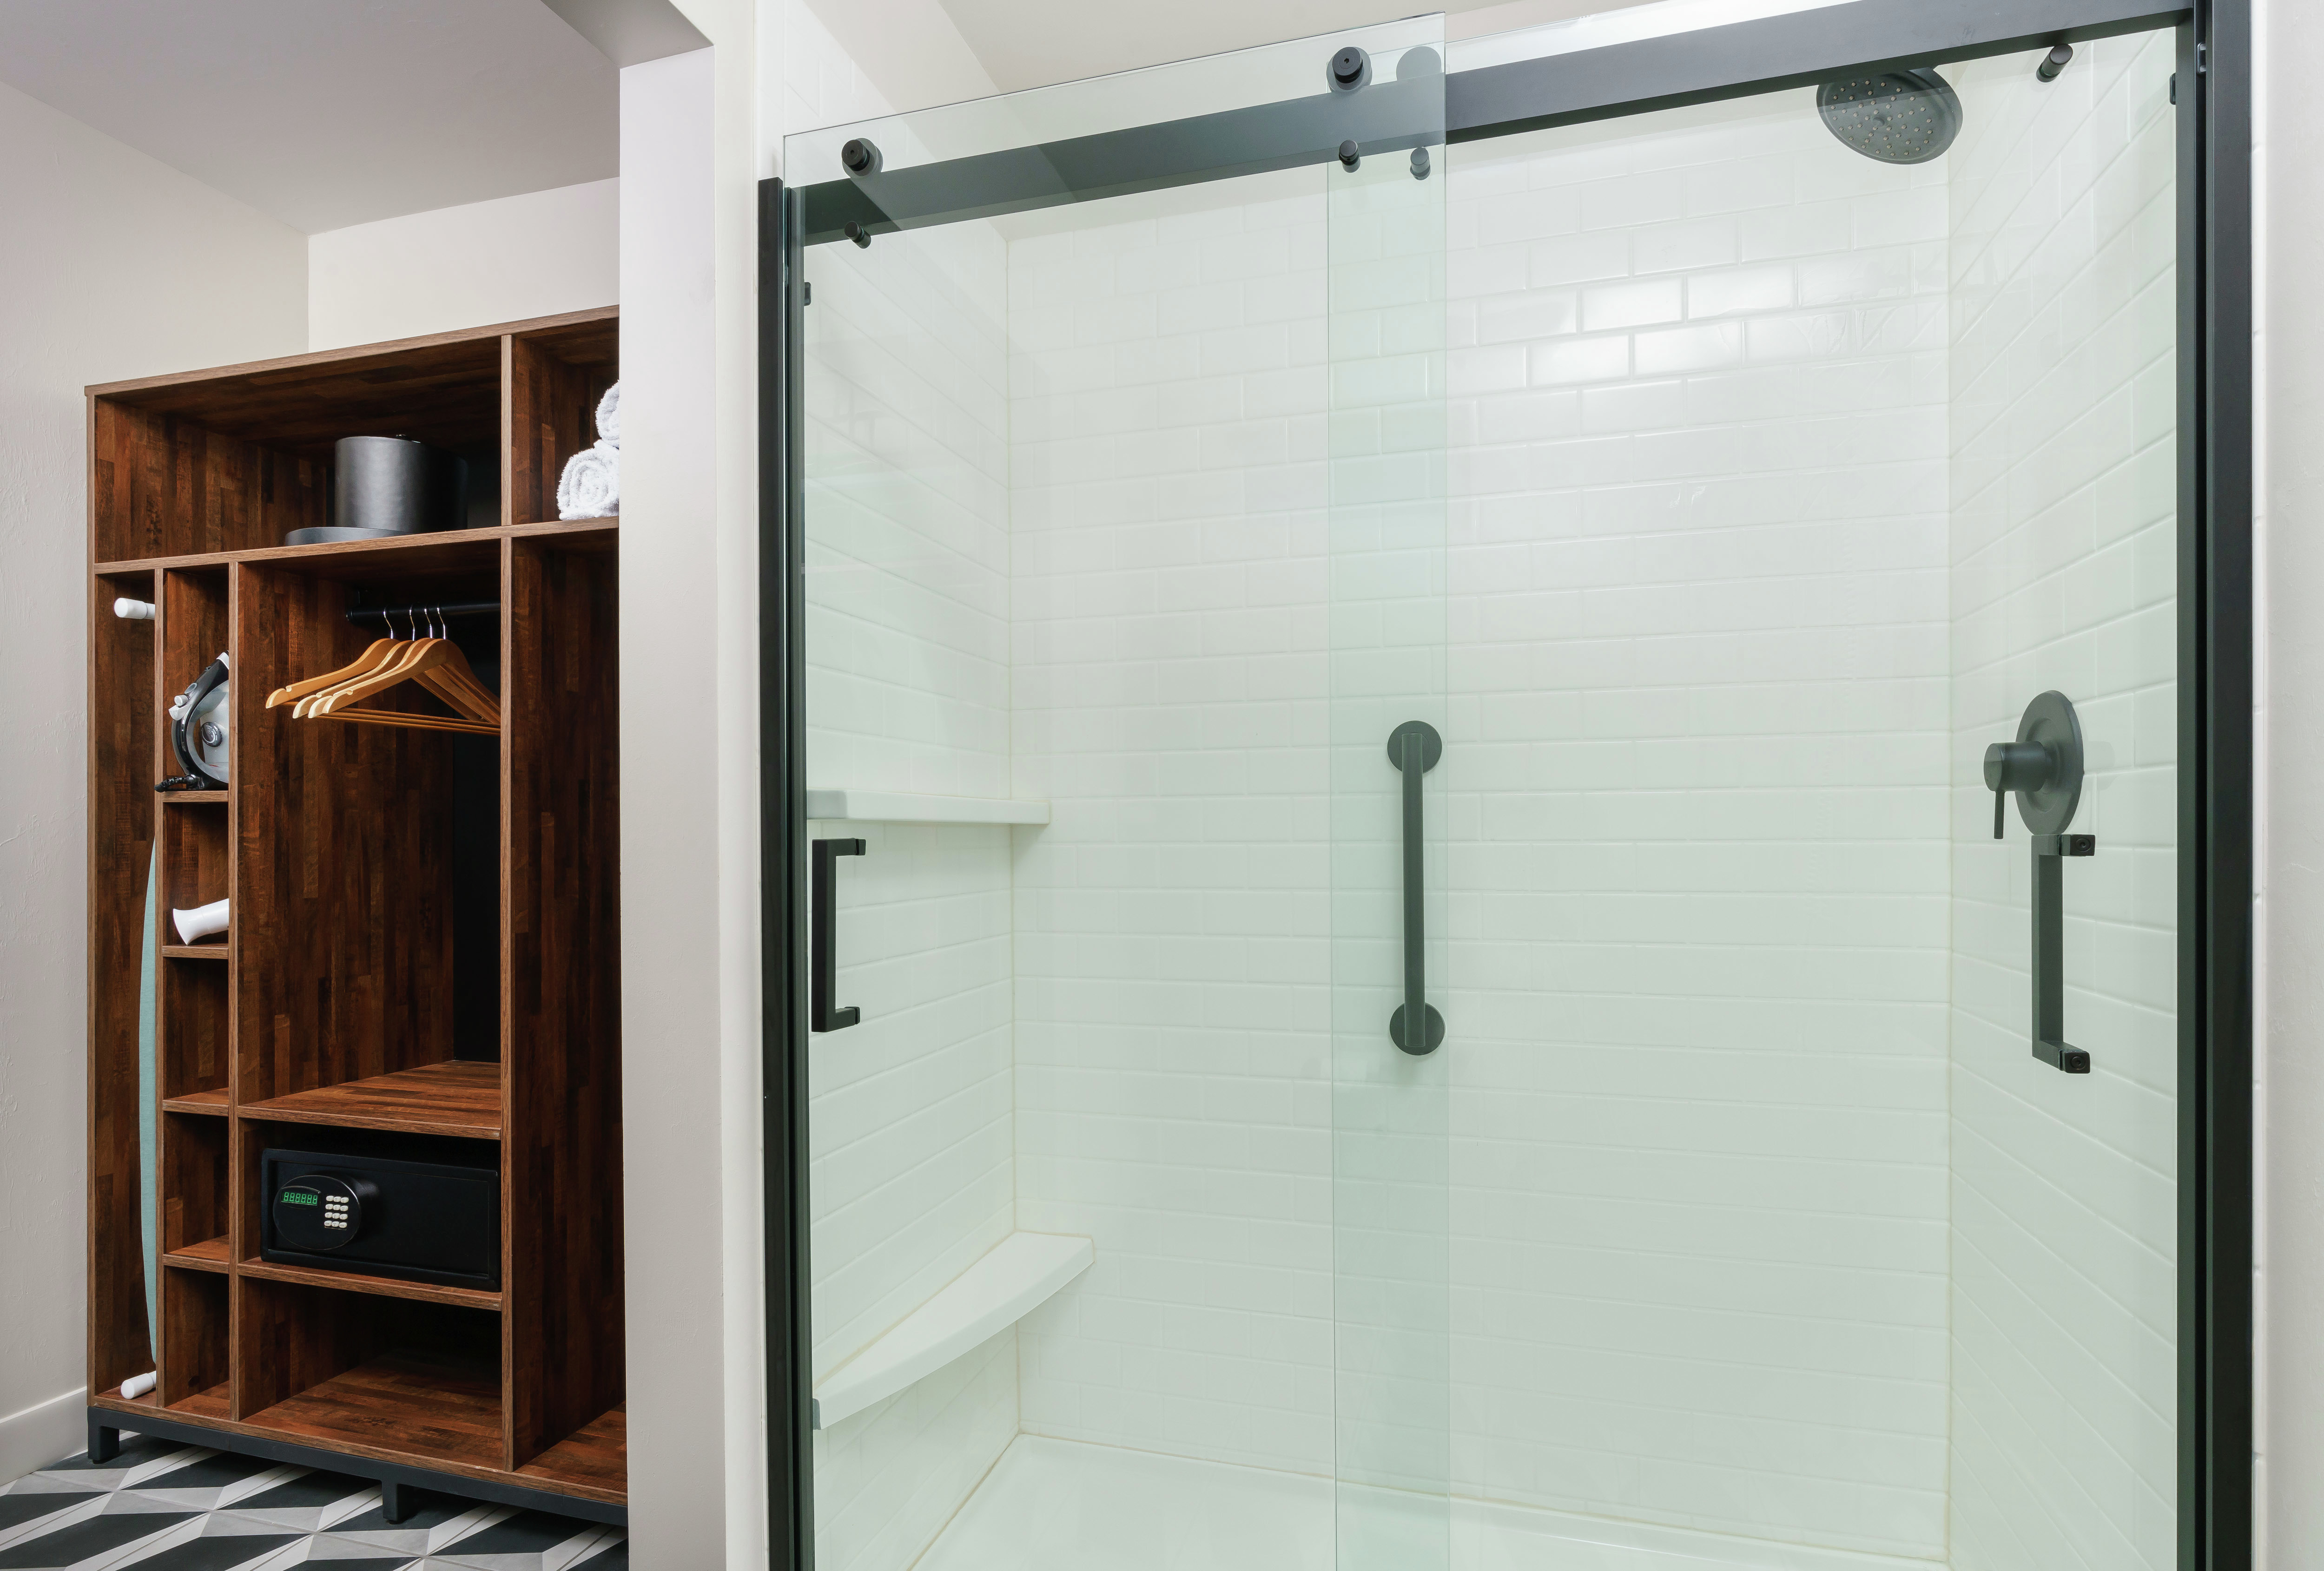 Guest Bathroom with Glass Shower